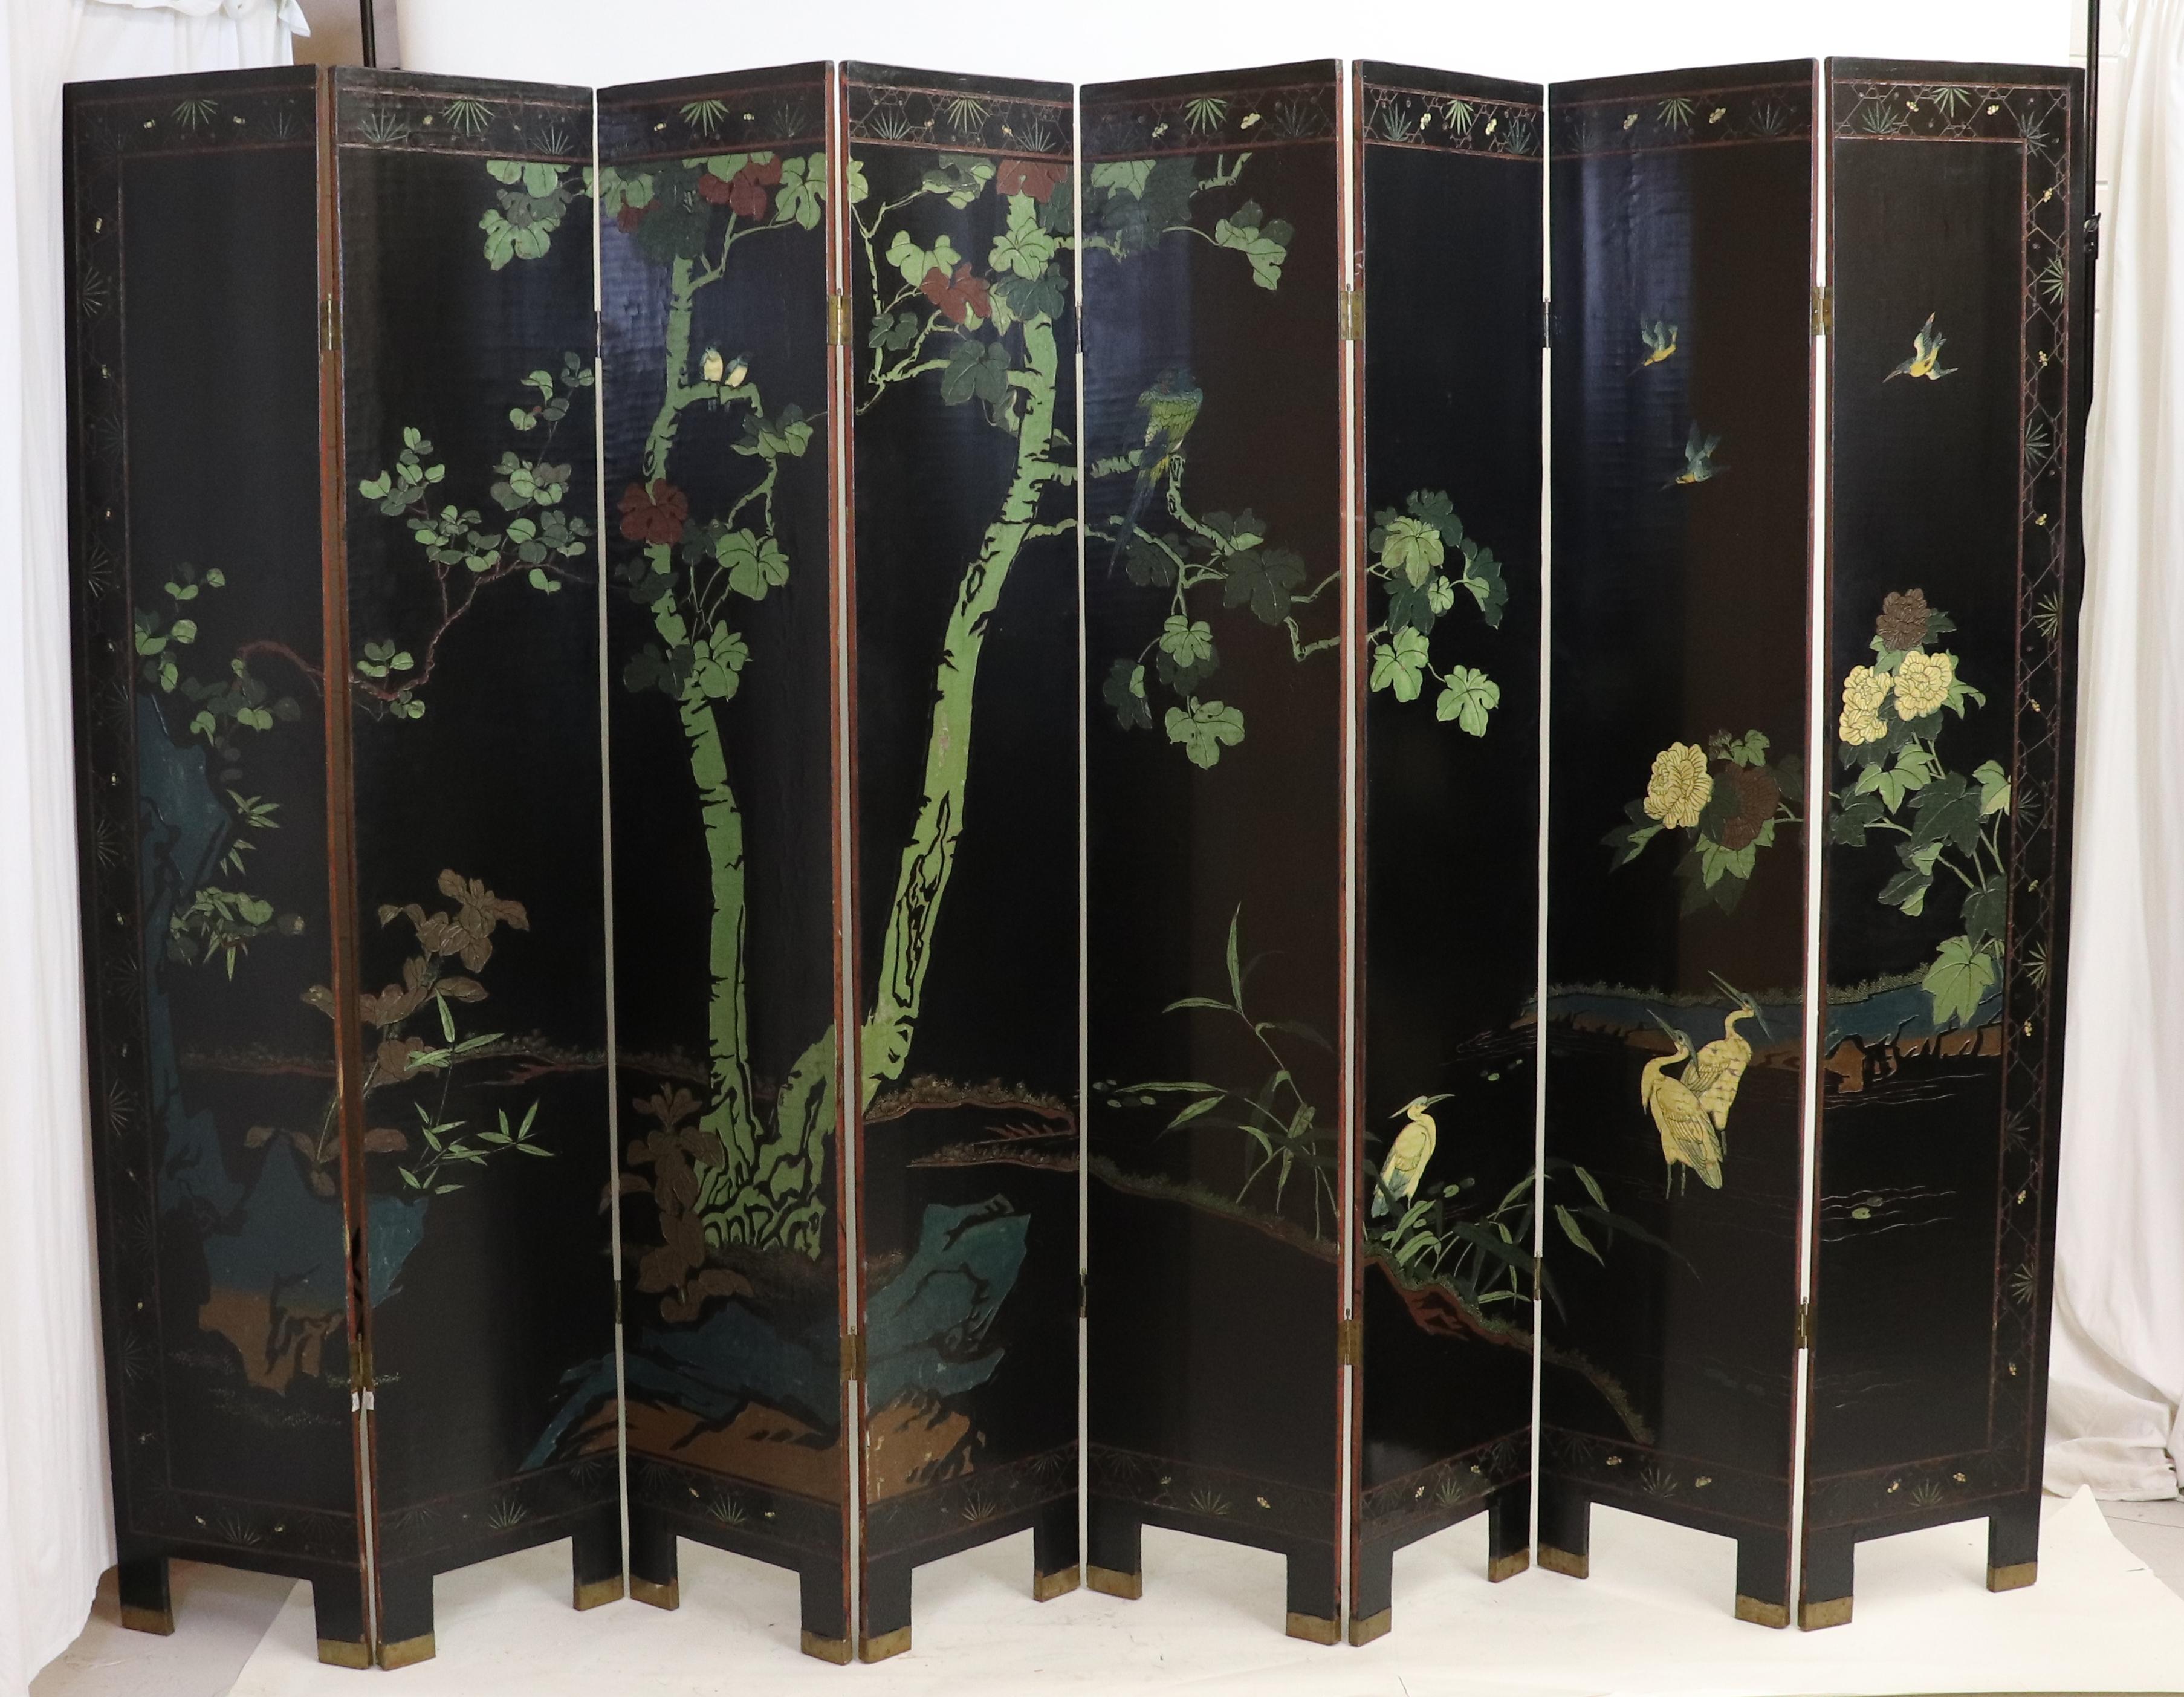 This double-sided eight-panel Coromandel export black lacquered screen depicts a natural landscape with birds, trees, and chrysanthemums. In the Coromandel lacquer technique, a layer several millimeters thick of chalk mixed with clay is applied to